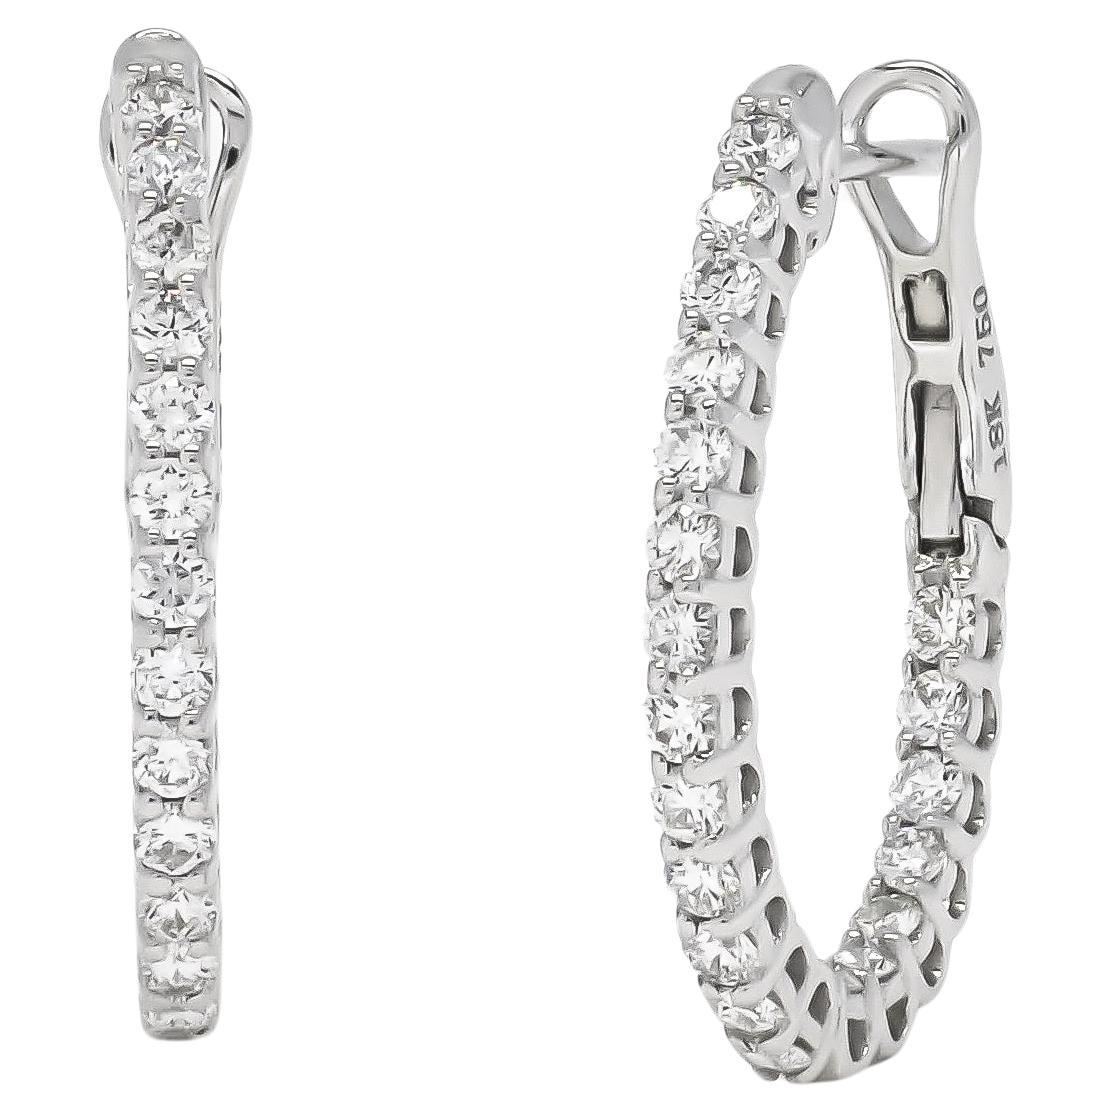 Natural Diamond 1.02 Carats 18KT White Gold 'In and out' Hoop Earrings For Sale